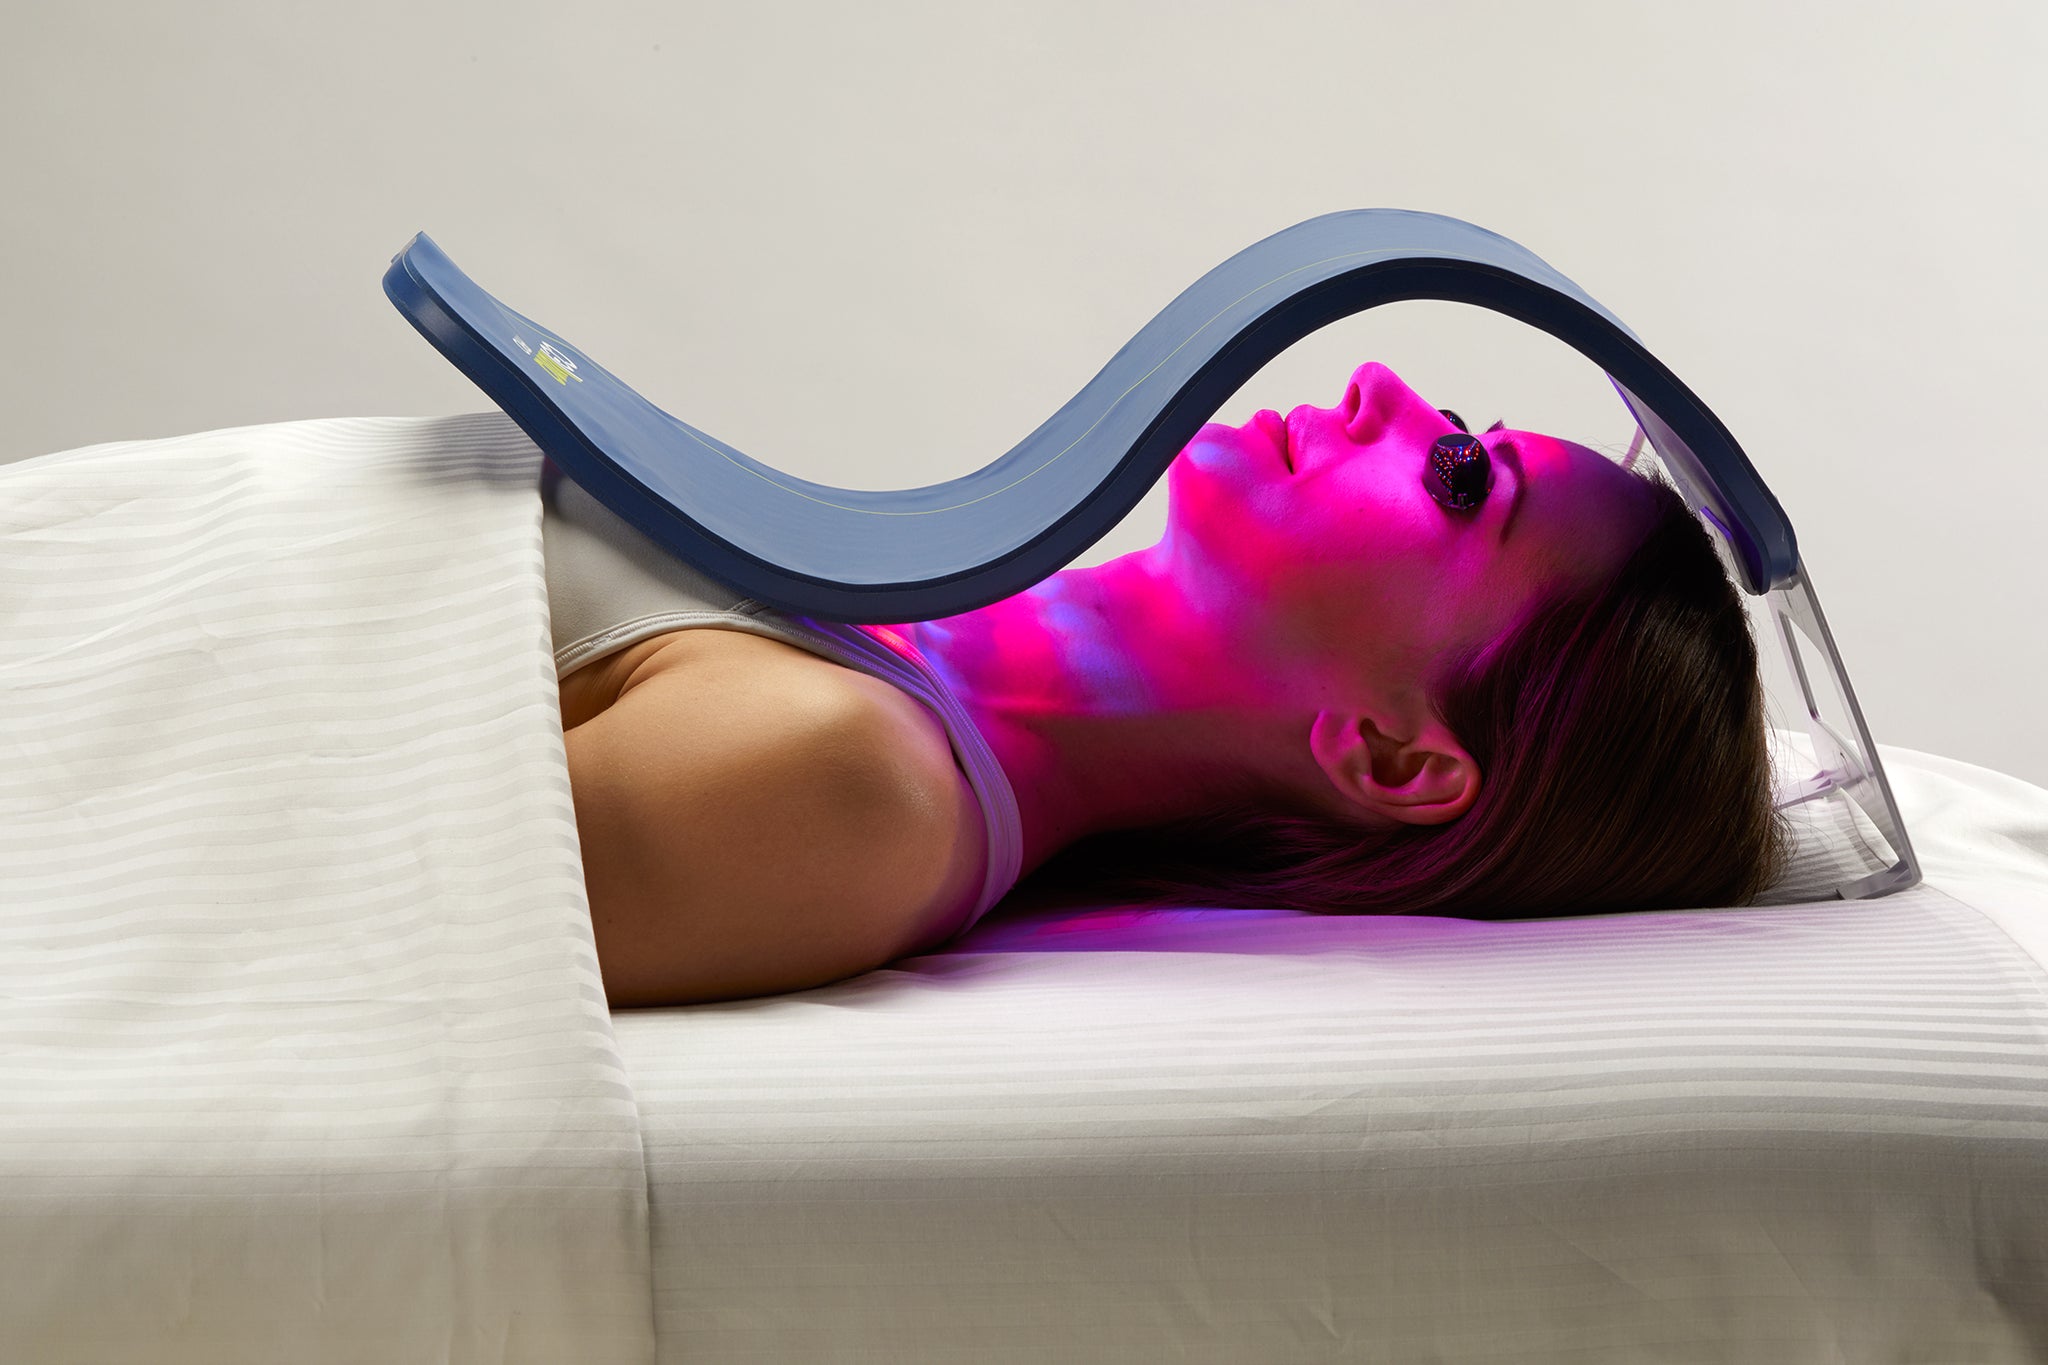 Full-Body LED Light Therapy without the High Price Tag of a Bed